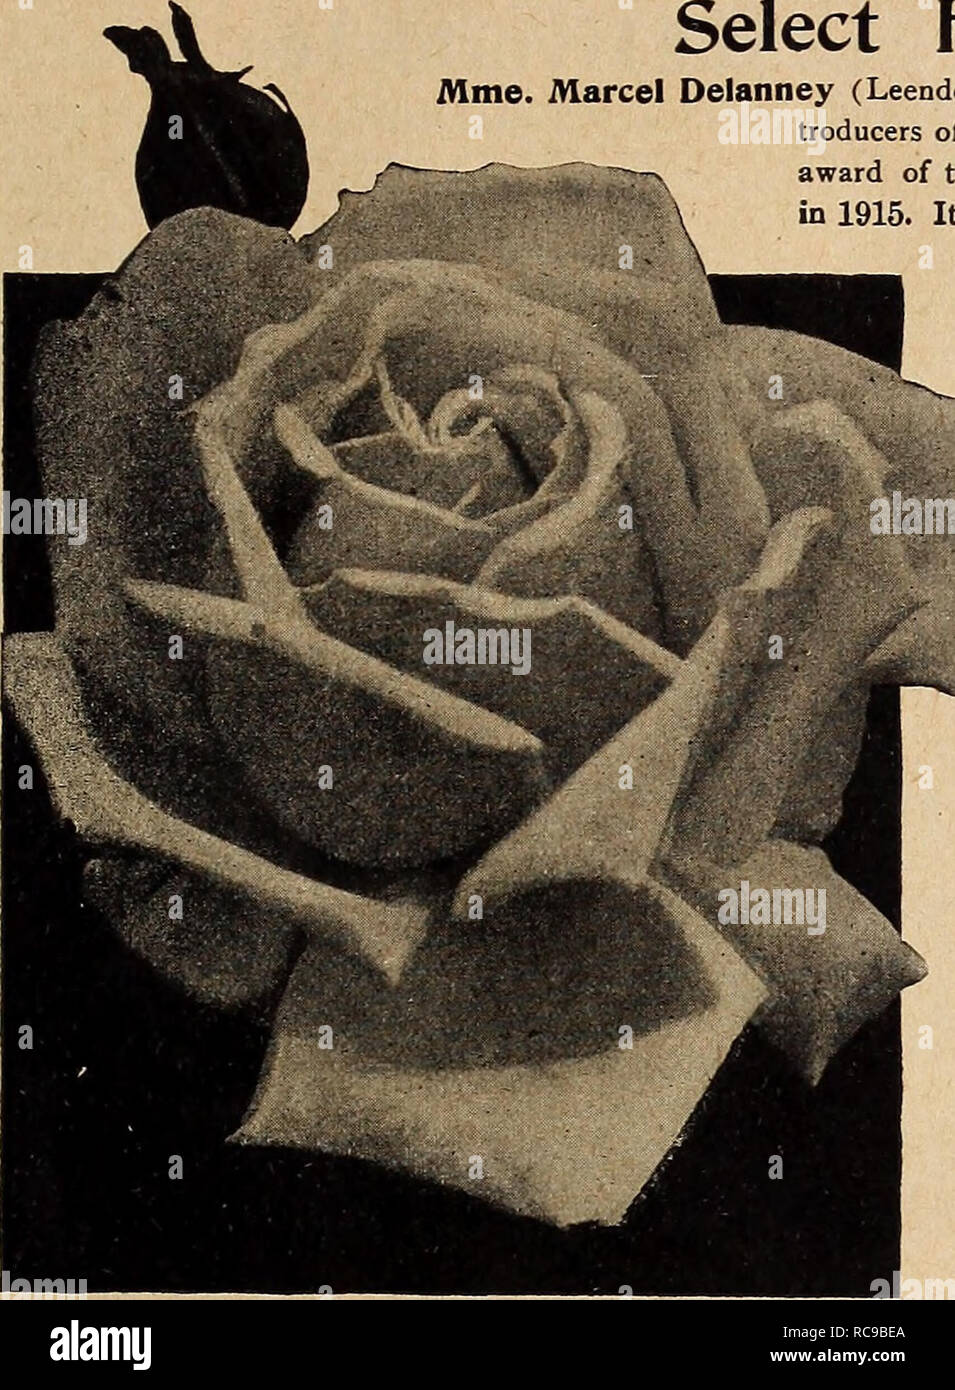 . Dreer's garden book 1920. Seeds Catalogs; Nursery stock Catalogs; Gardening Equipment and supplies Catalogs; Flowers Seeds Catalogs; Vegetables Seeds Catalogs; Fruit Seeds Catalogs. MfADRB PHILADELPHIA PA SELECT- R05§S; D1T1 123 it Select Hybrid=Tea Roses Mme. Marcel Delanney (Leenders, 1916). A surprisingly beautiful variety raised by the in- troducers of the popular Rose Jonkheer J. L. Mock, and honored with the award of the Gold Medal at the trials of the Bagatelle Gardens at Paris is distinct and peculiar in color, a pale soft pink or rose shaded with hydrangea pink; the flowers are very Stock Photo